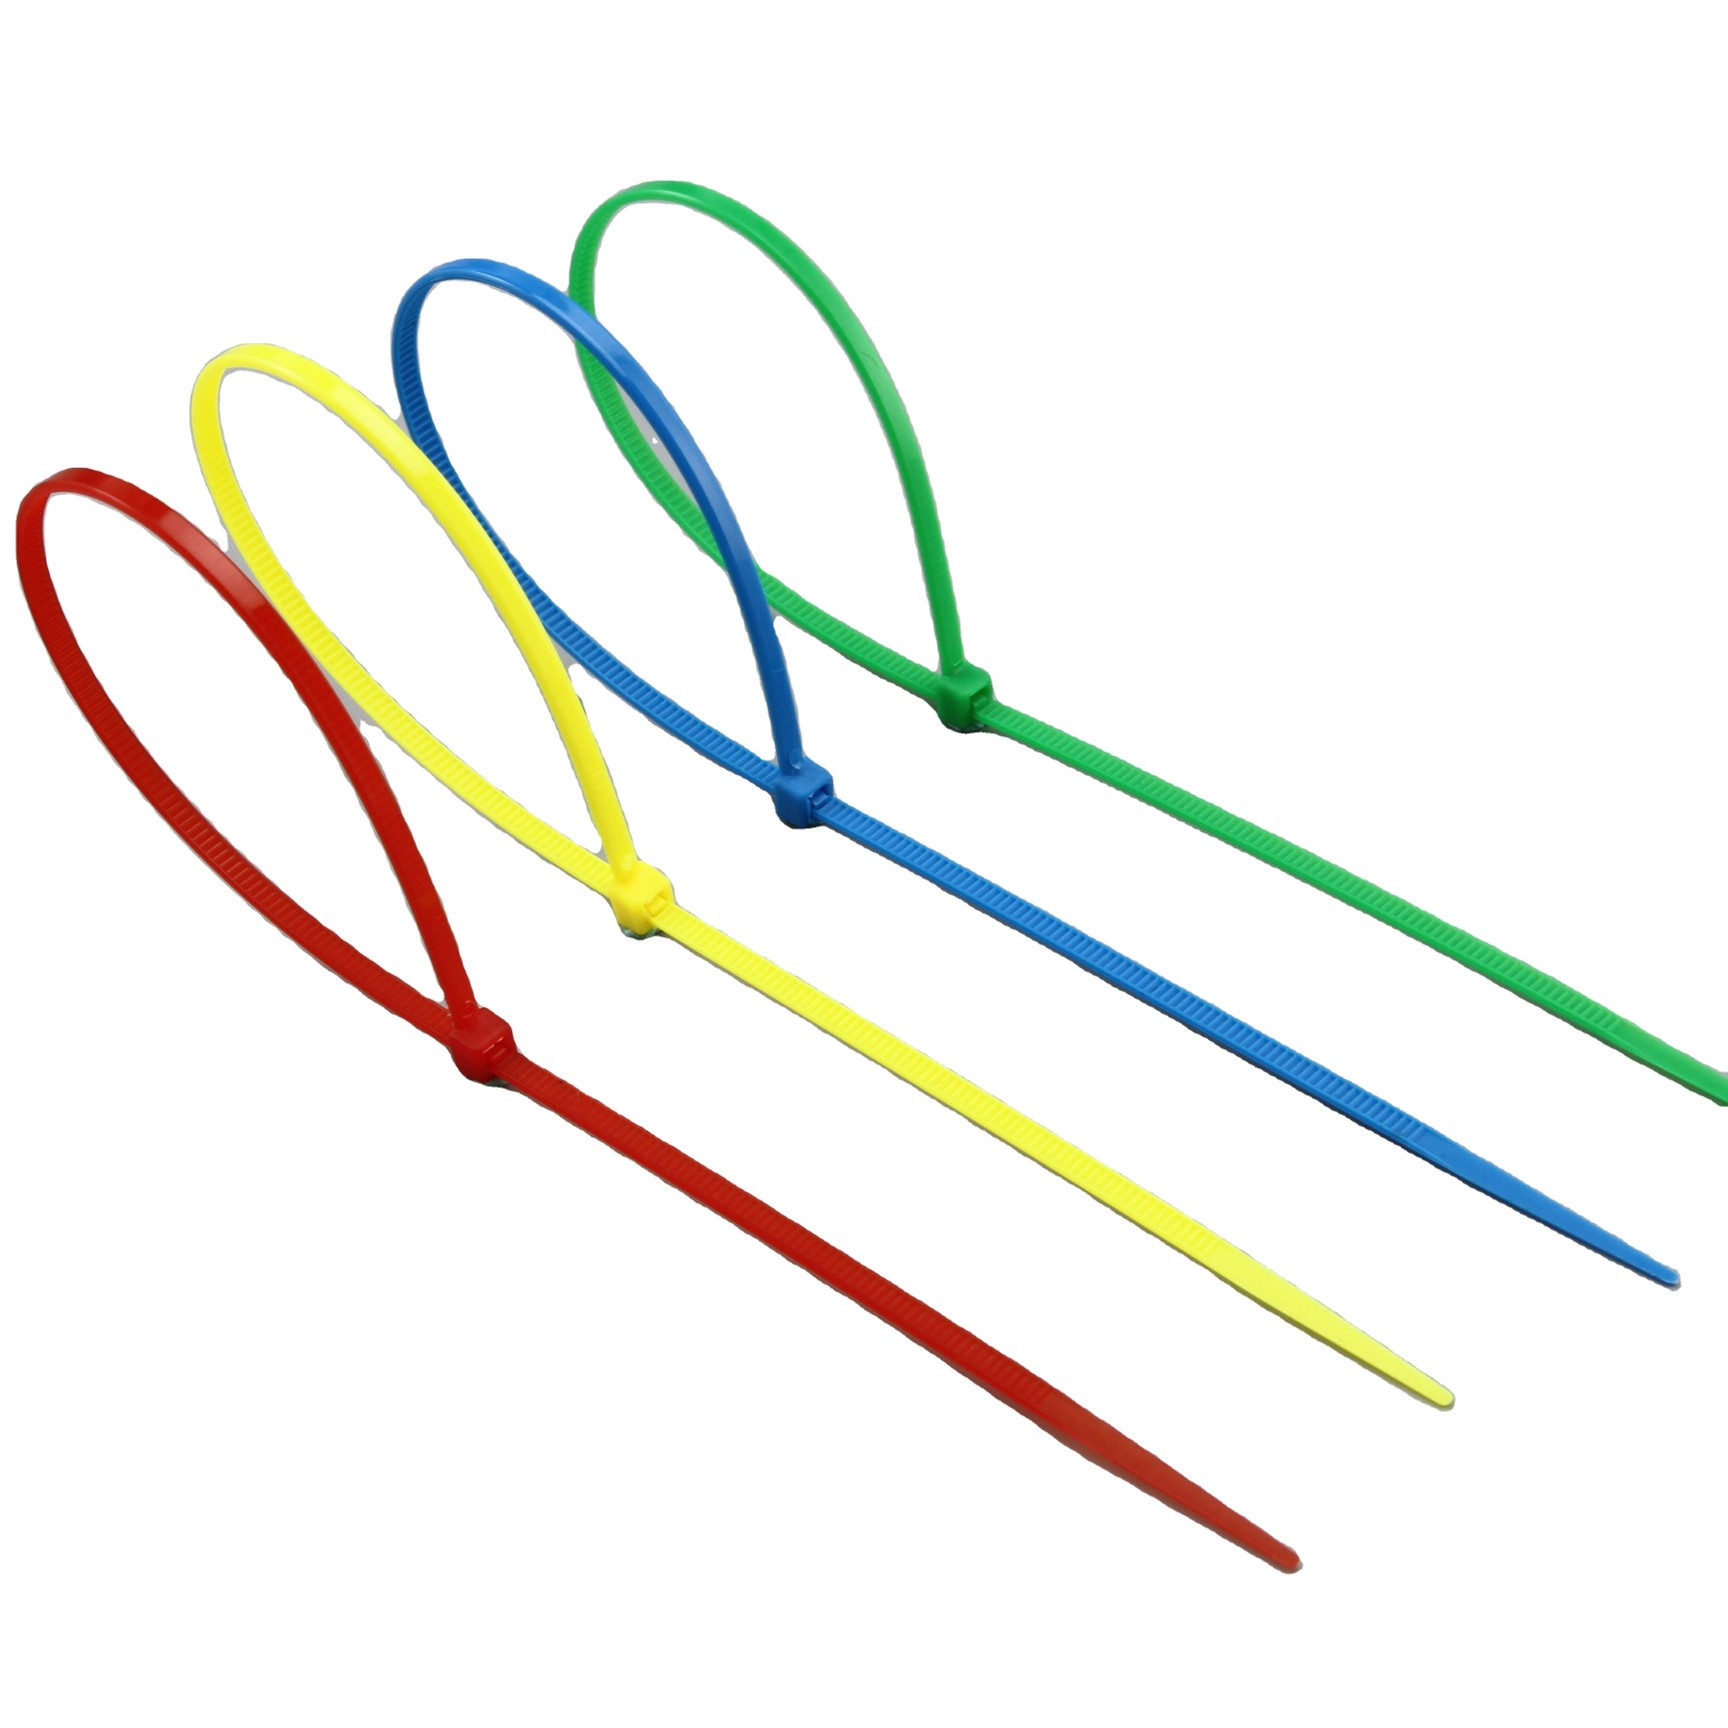 Noose cable ties - 3 